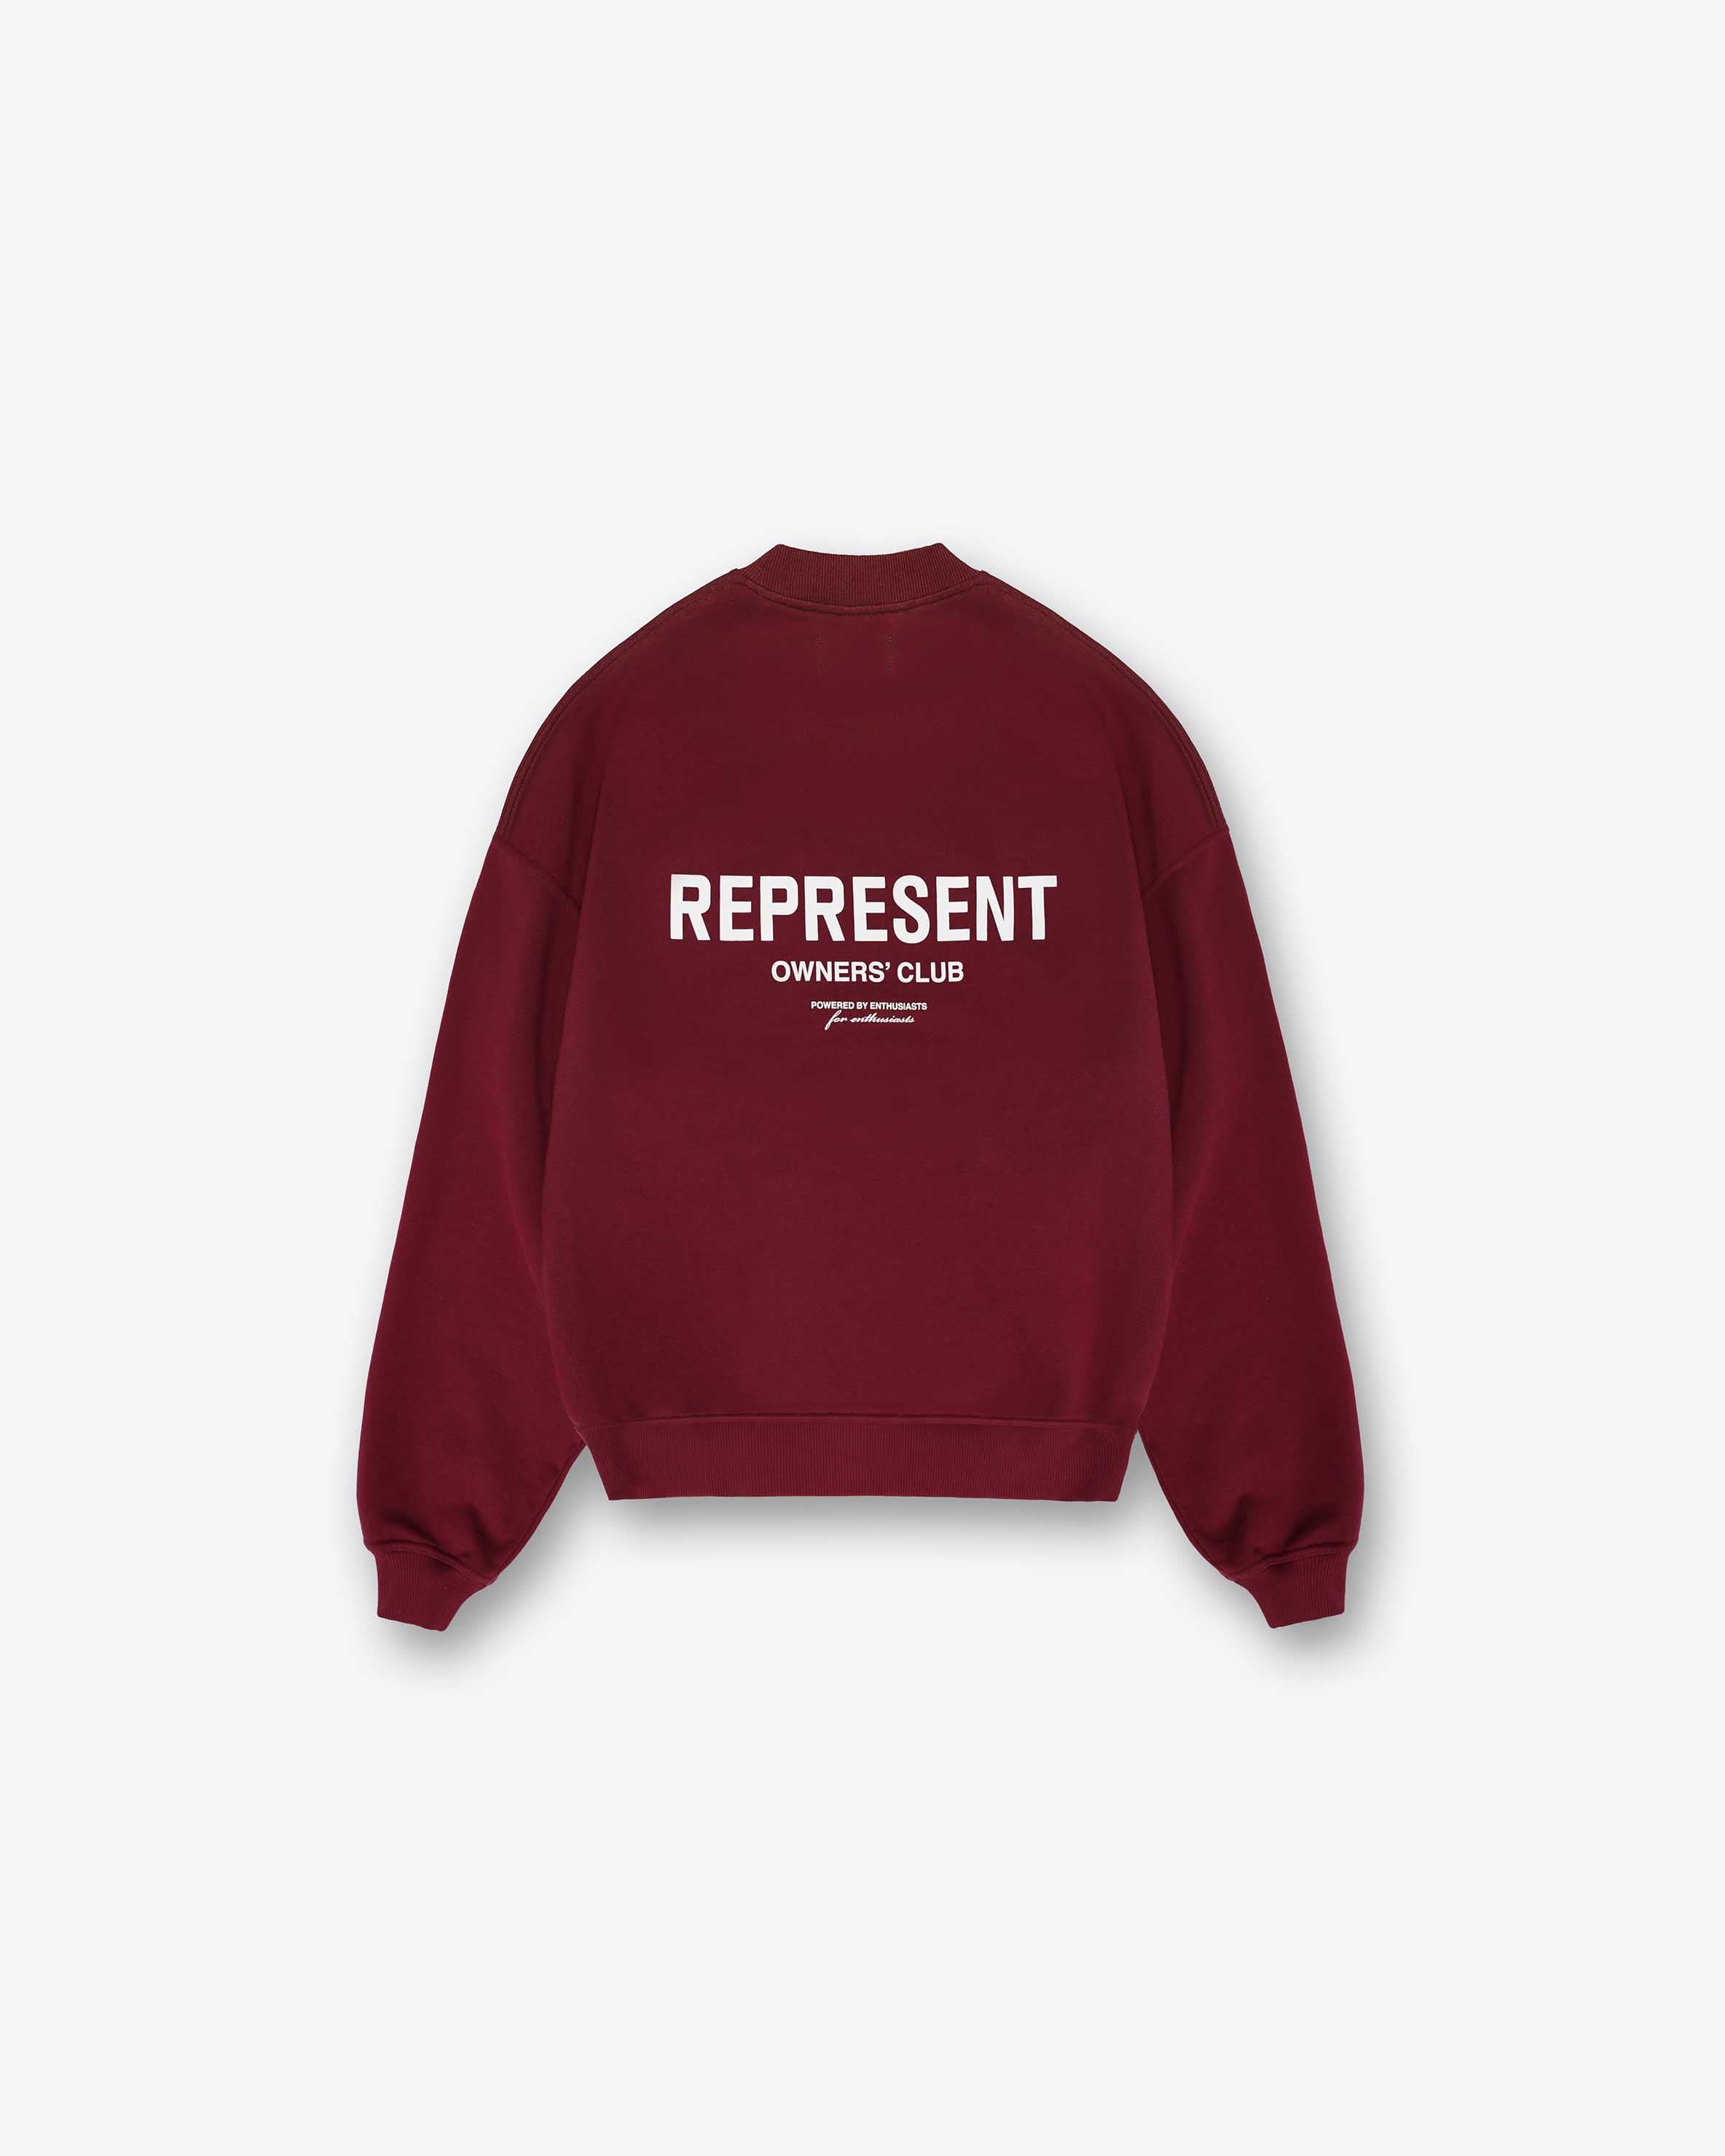 Represent Owners Club Sweater | Maroon Sweaters Owners Club | Represent Clo